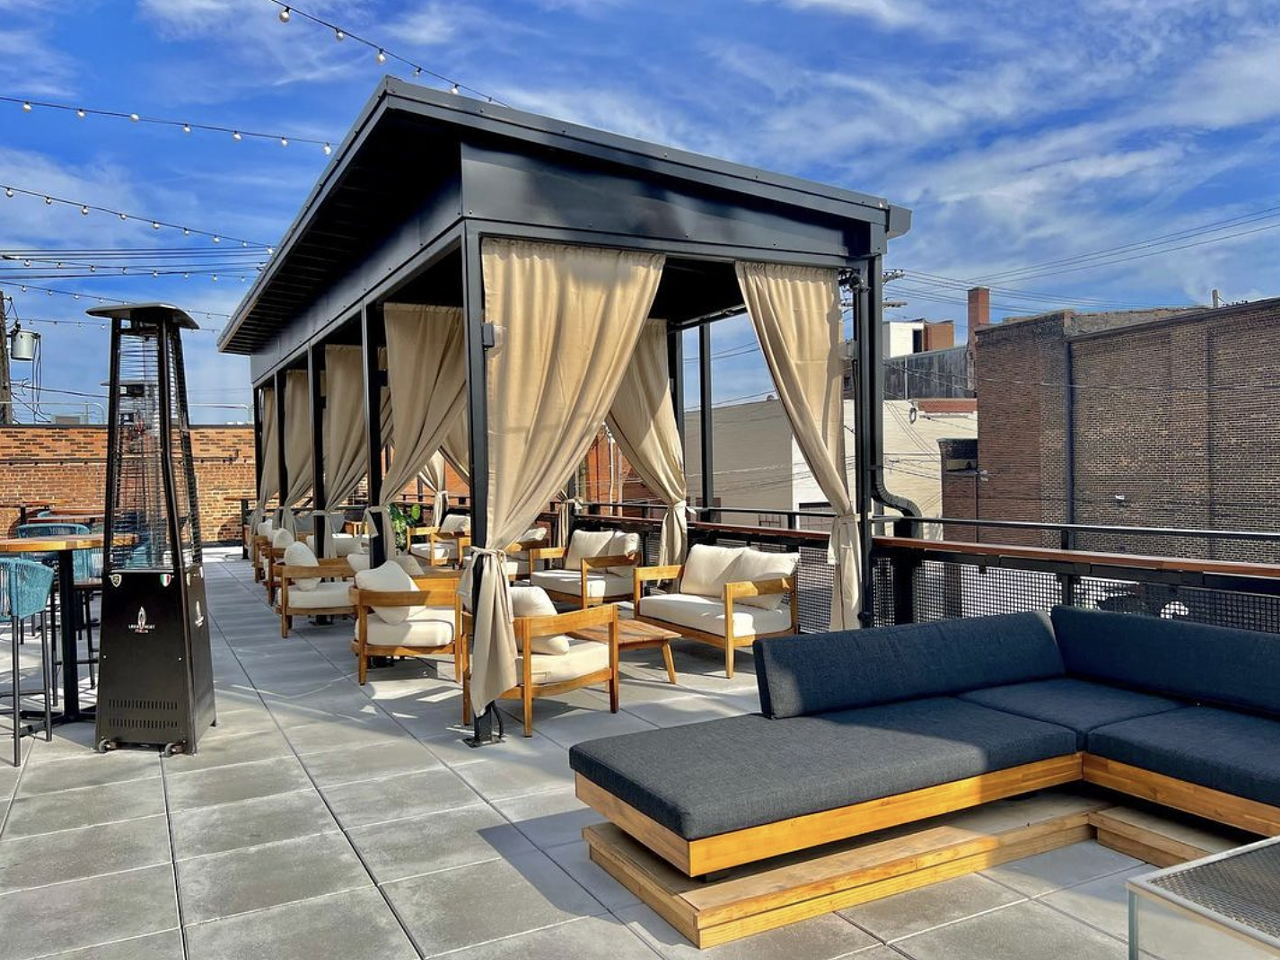 Trellis Rooftop Bar 1384 Hird Rd., Lakewood First announced in 2019, Studio West 117 finally opened last fall. The Lakewood-based development is modeled after LGBT-focused neighborhoods like the Castro in San Francisco and the Short North in Columbus. Phase one, which is called the Fieldhouse, features two restaurants, Muze Gastropub and Eat Me Pizza, as well as the Trellis Rooftop Bar. Billed as “Lakewood’s first and only rooftop patio,” the bar features 4,000 square feet of indoor and outdoor space for guests to drink, dine and dance. The “bougie rum jungle vibe” is more upscale compared to Muze, with custom booths, cabanas, drop chandeliers and lots of greenery.